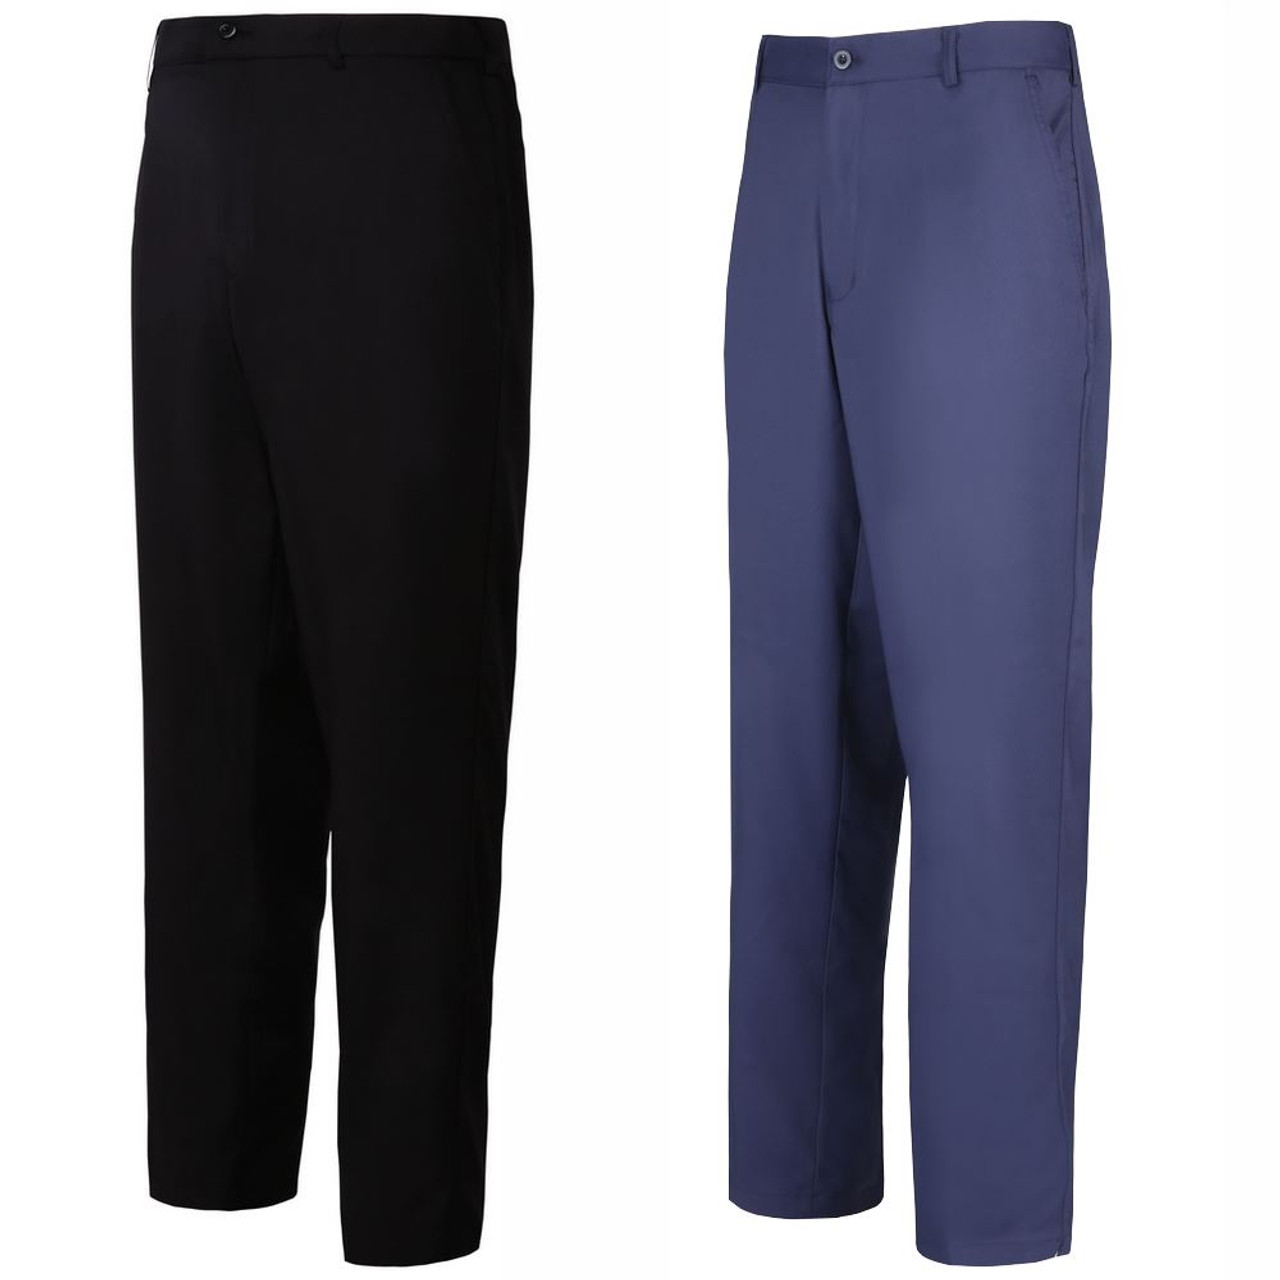 Golf trousers buy chinos in a variety of fits online  MEYERHosen